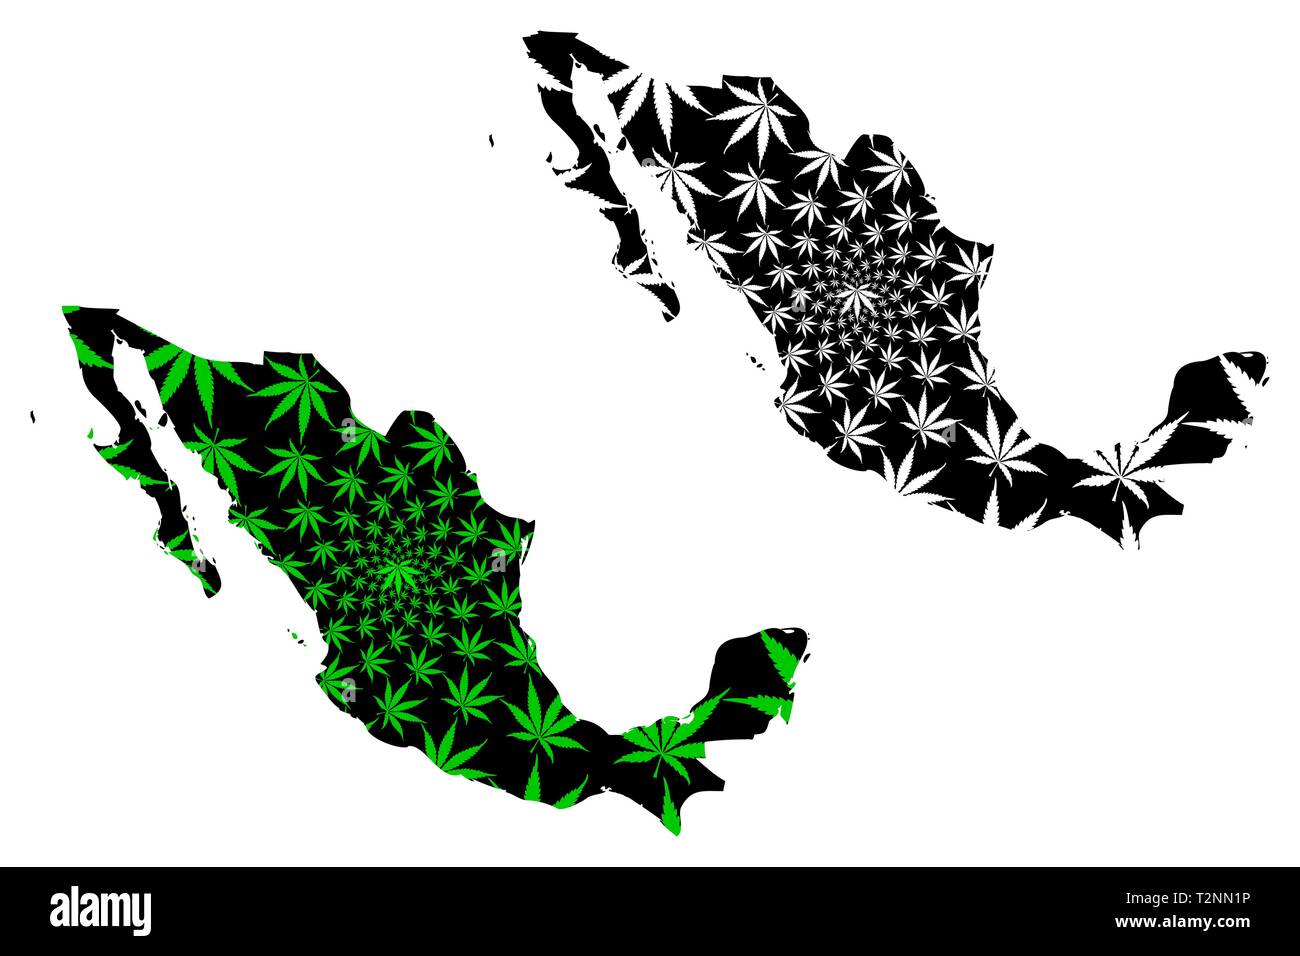 Mexico - map is designed cannabis leaf green and black, United Mexican States map made of marijuana (marihuana,THC) foliage, Stock Vector